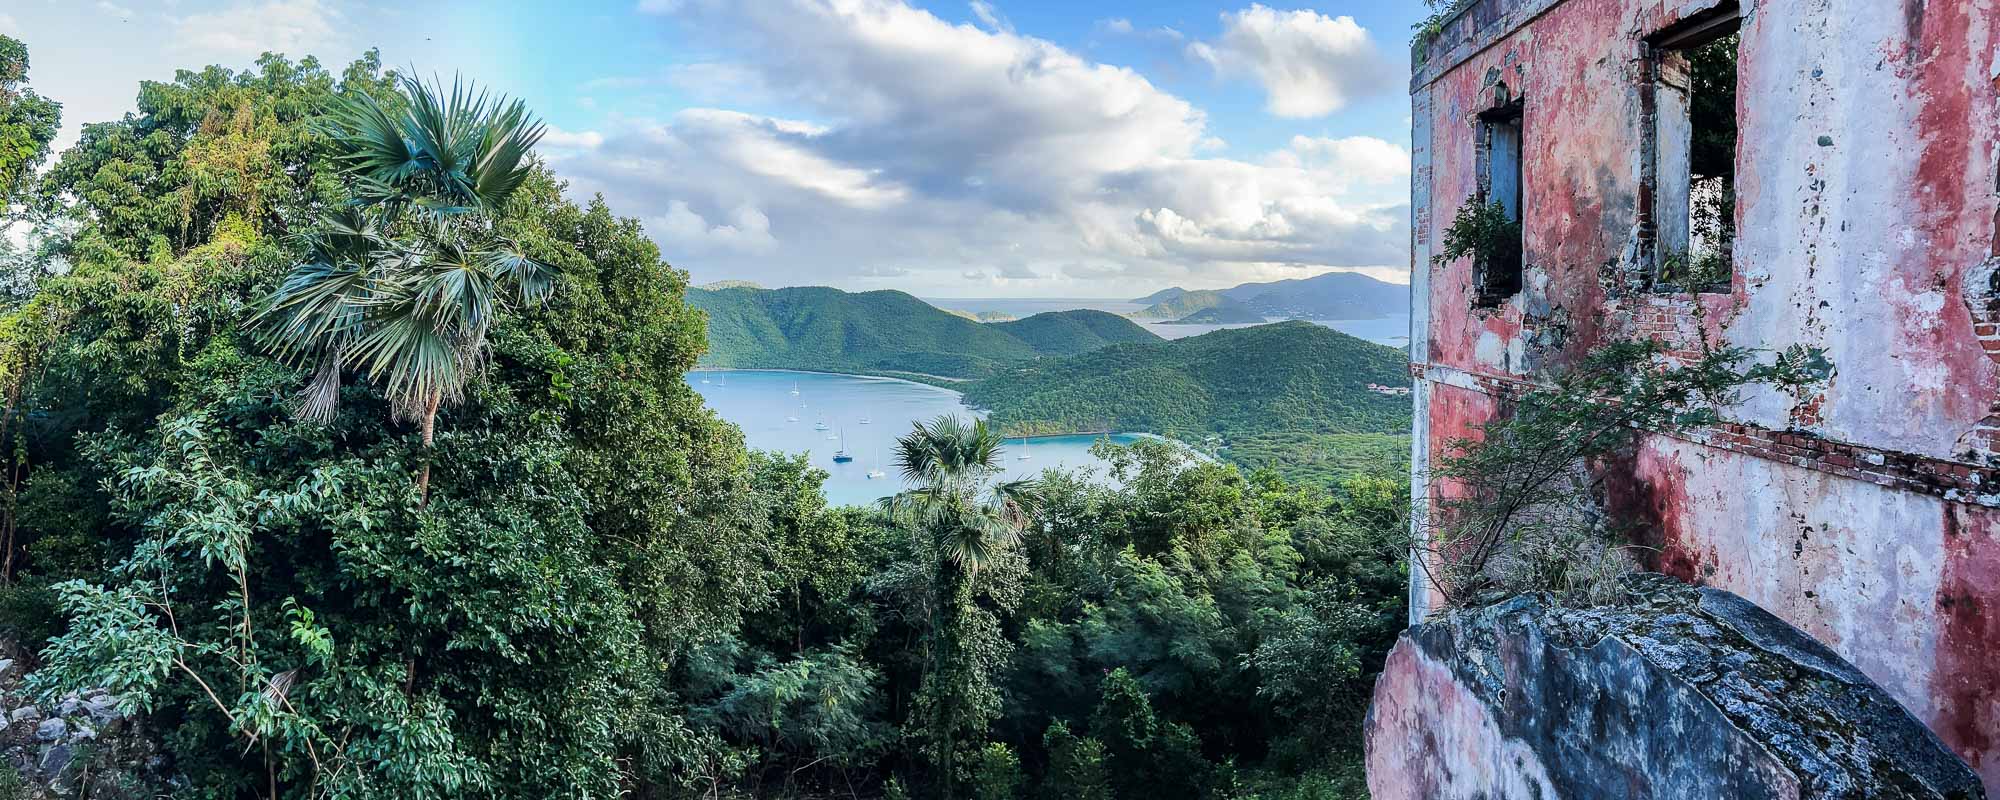 Panoramic view from America Hill Ruins on the Cinnamon Bay Trail, Virgin Islands National Park